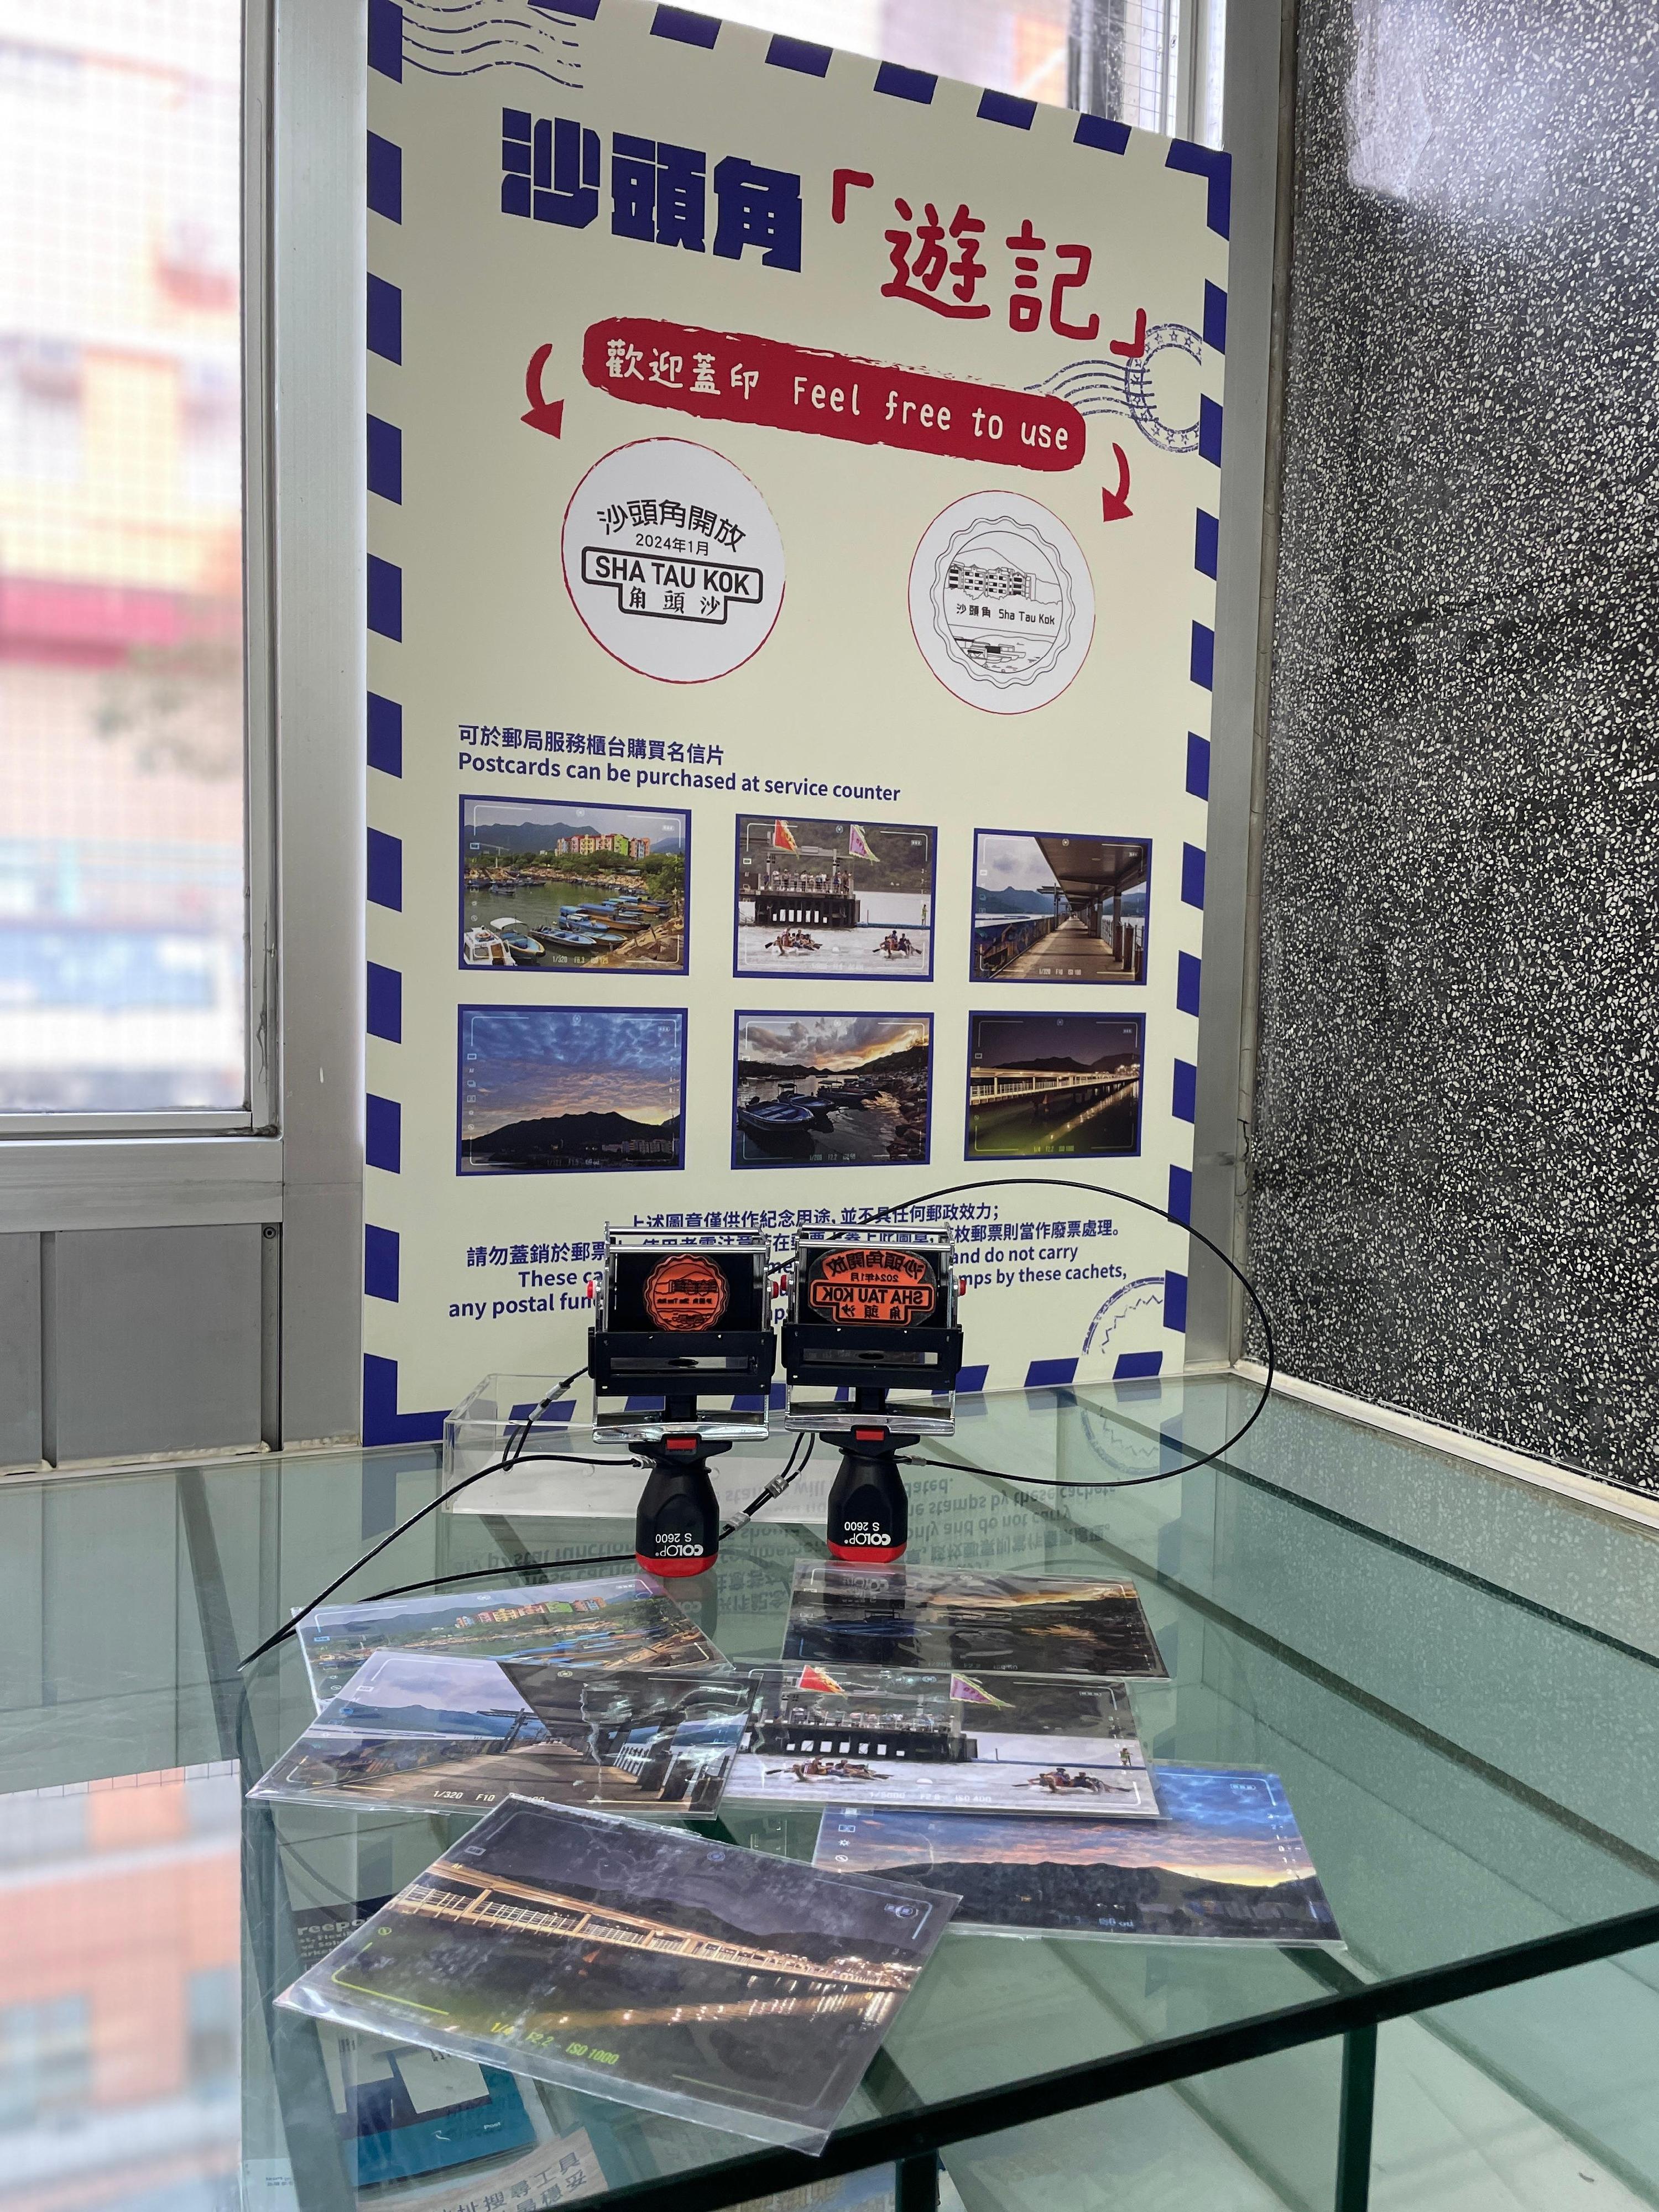 The Second Phase Opening-up of Sha Tau Kok will begin on January 1 next year. Initially, up to 1,000 tourists per day will be allowed to visit all parts of Sha Tau Kok, except Chung Ying Street, after applying online for a Closed Area Permit. Photo shows Sha Tau Kok specialty postcards sold at the Sha Tau Kok Post Office with unique postal chops.
